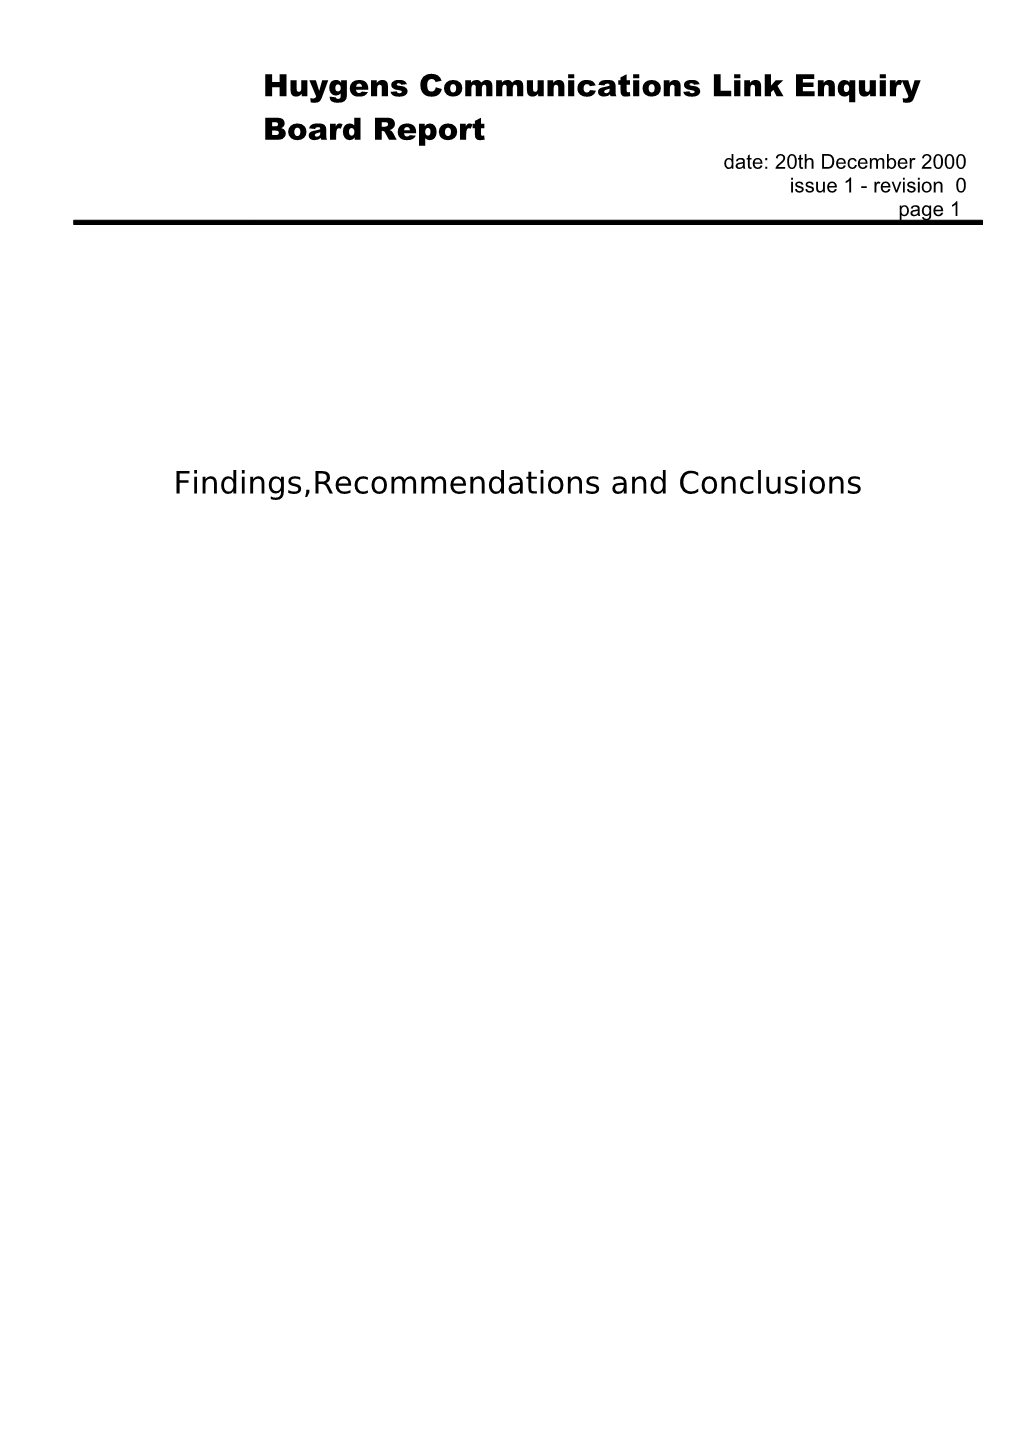 Findings,Recommendations and Conclusions